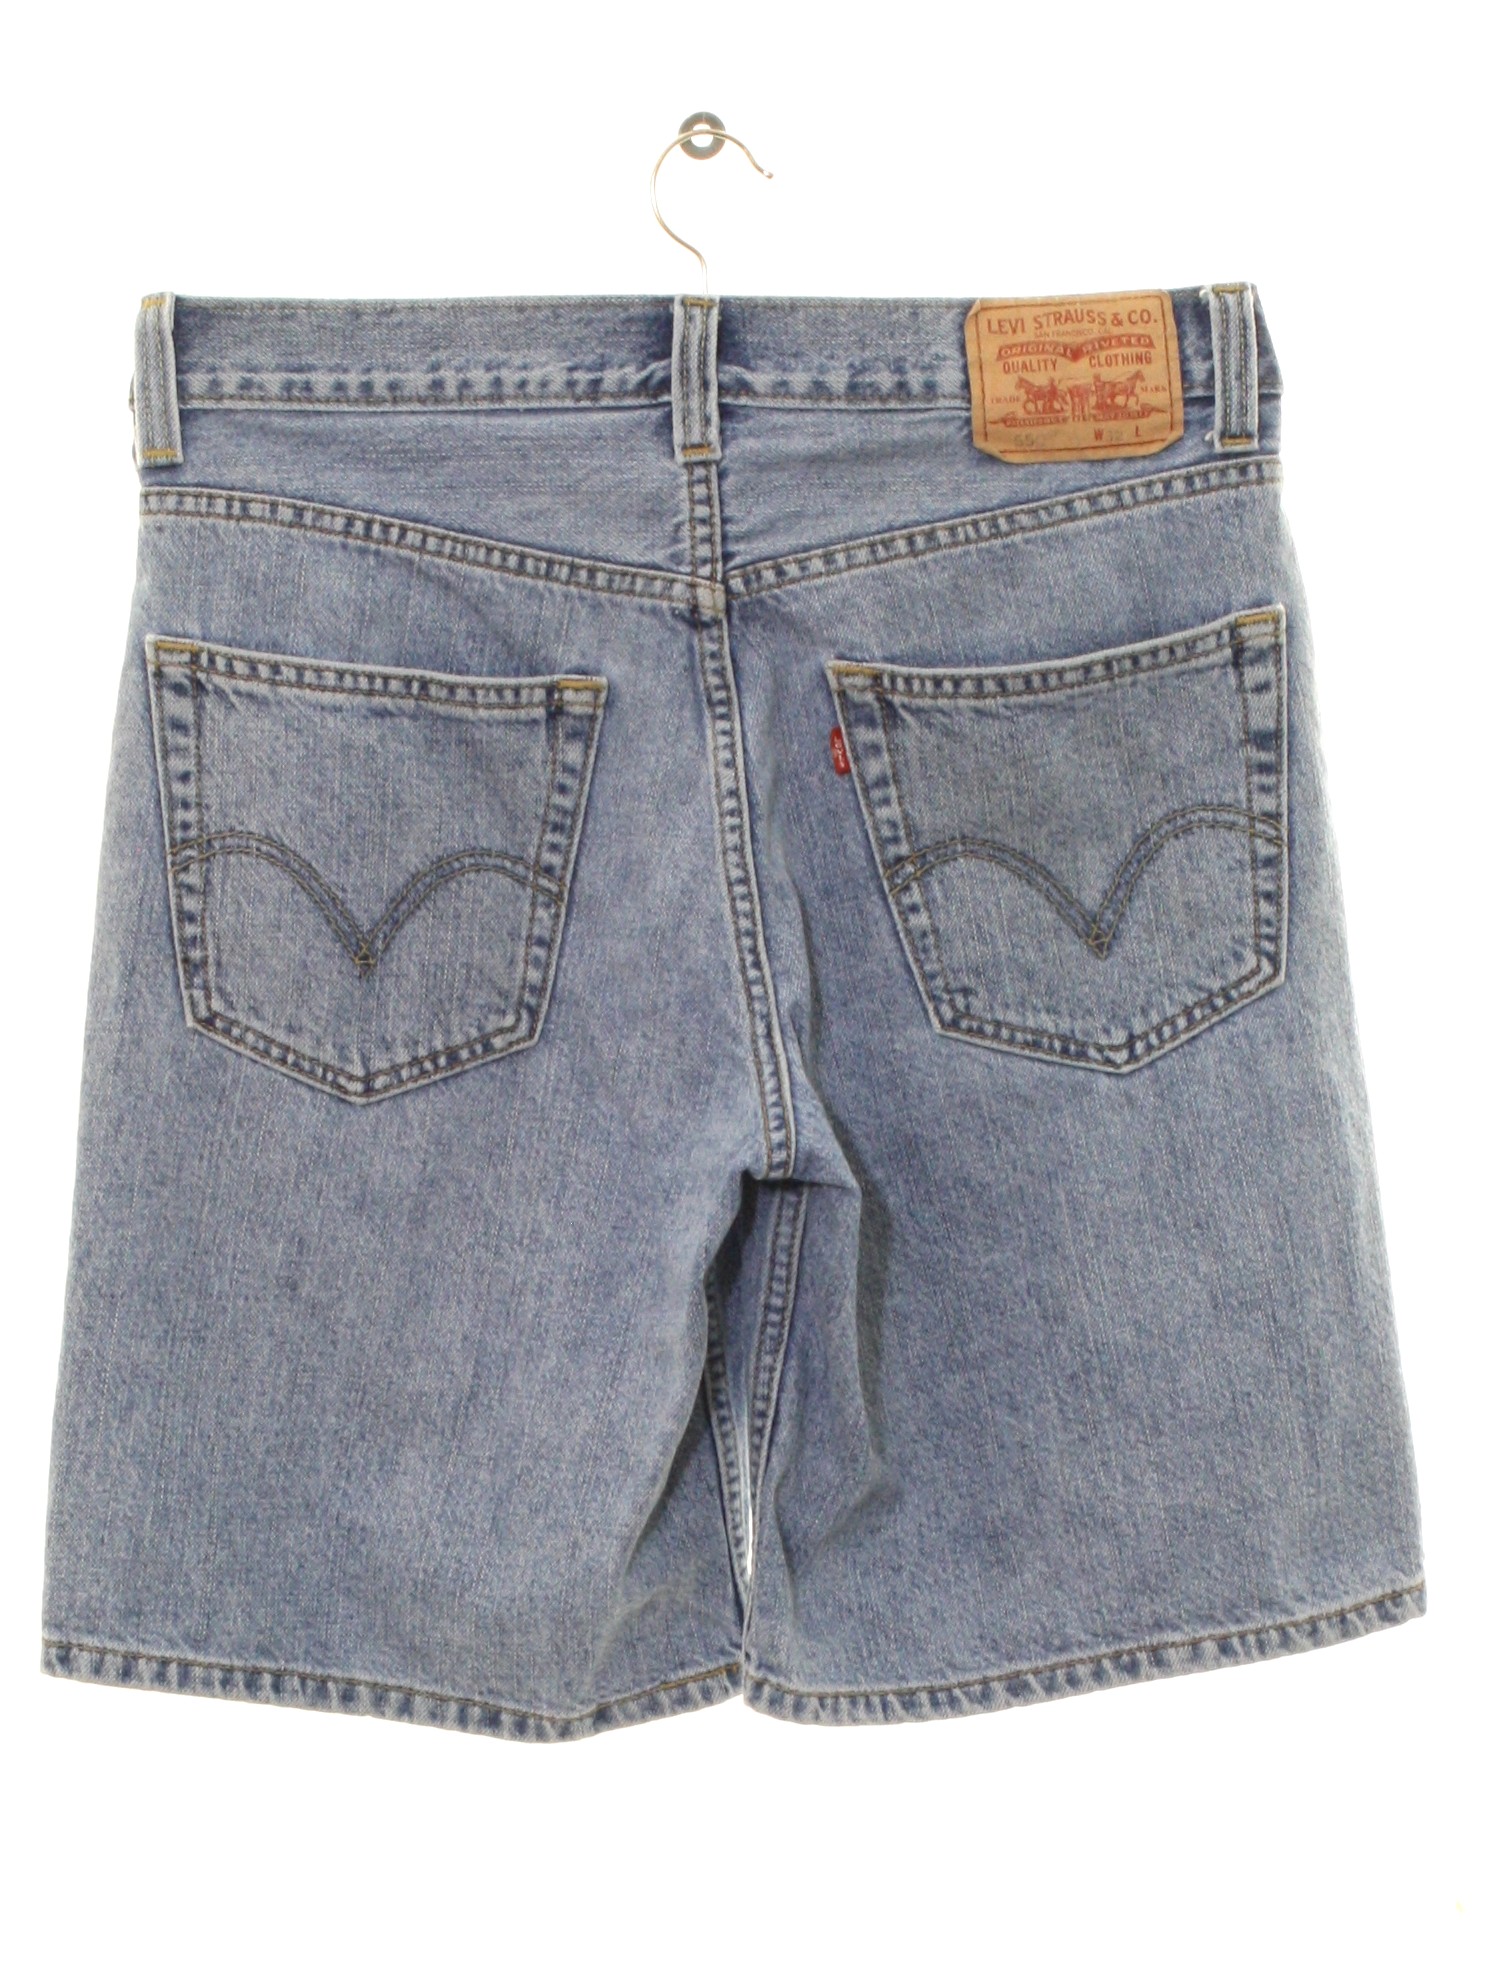 Shorts: 90s -Levis 550- Mens stone washed slightly faded blue cotton ...